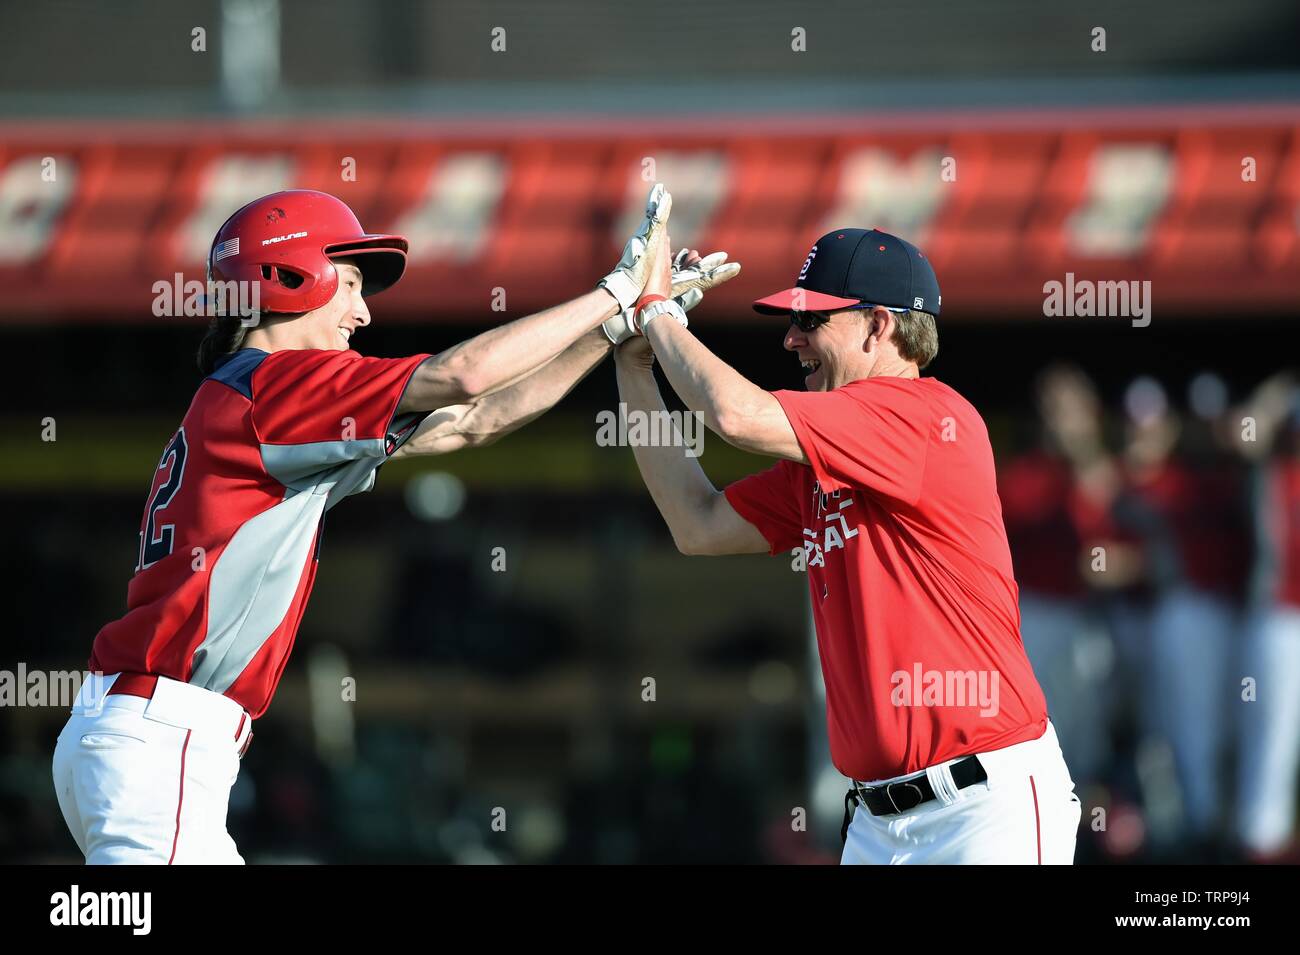 After hitting a home run, a player exchanges high fives with the third base coach on his trip around the bases. USA. Stock Photo